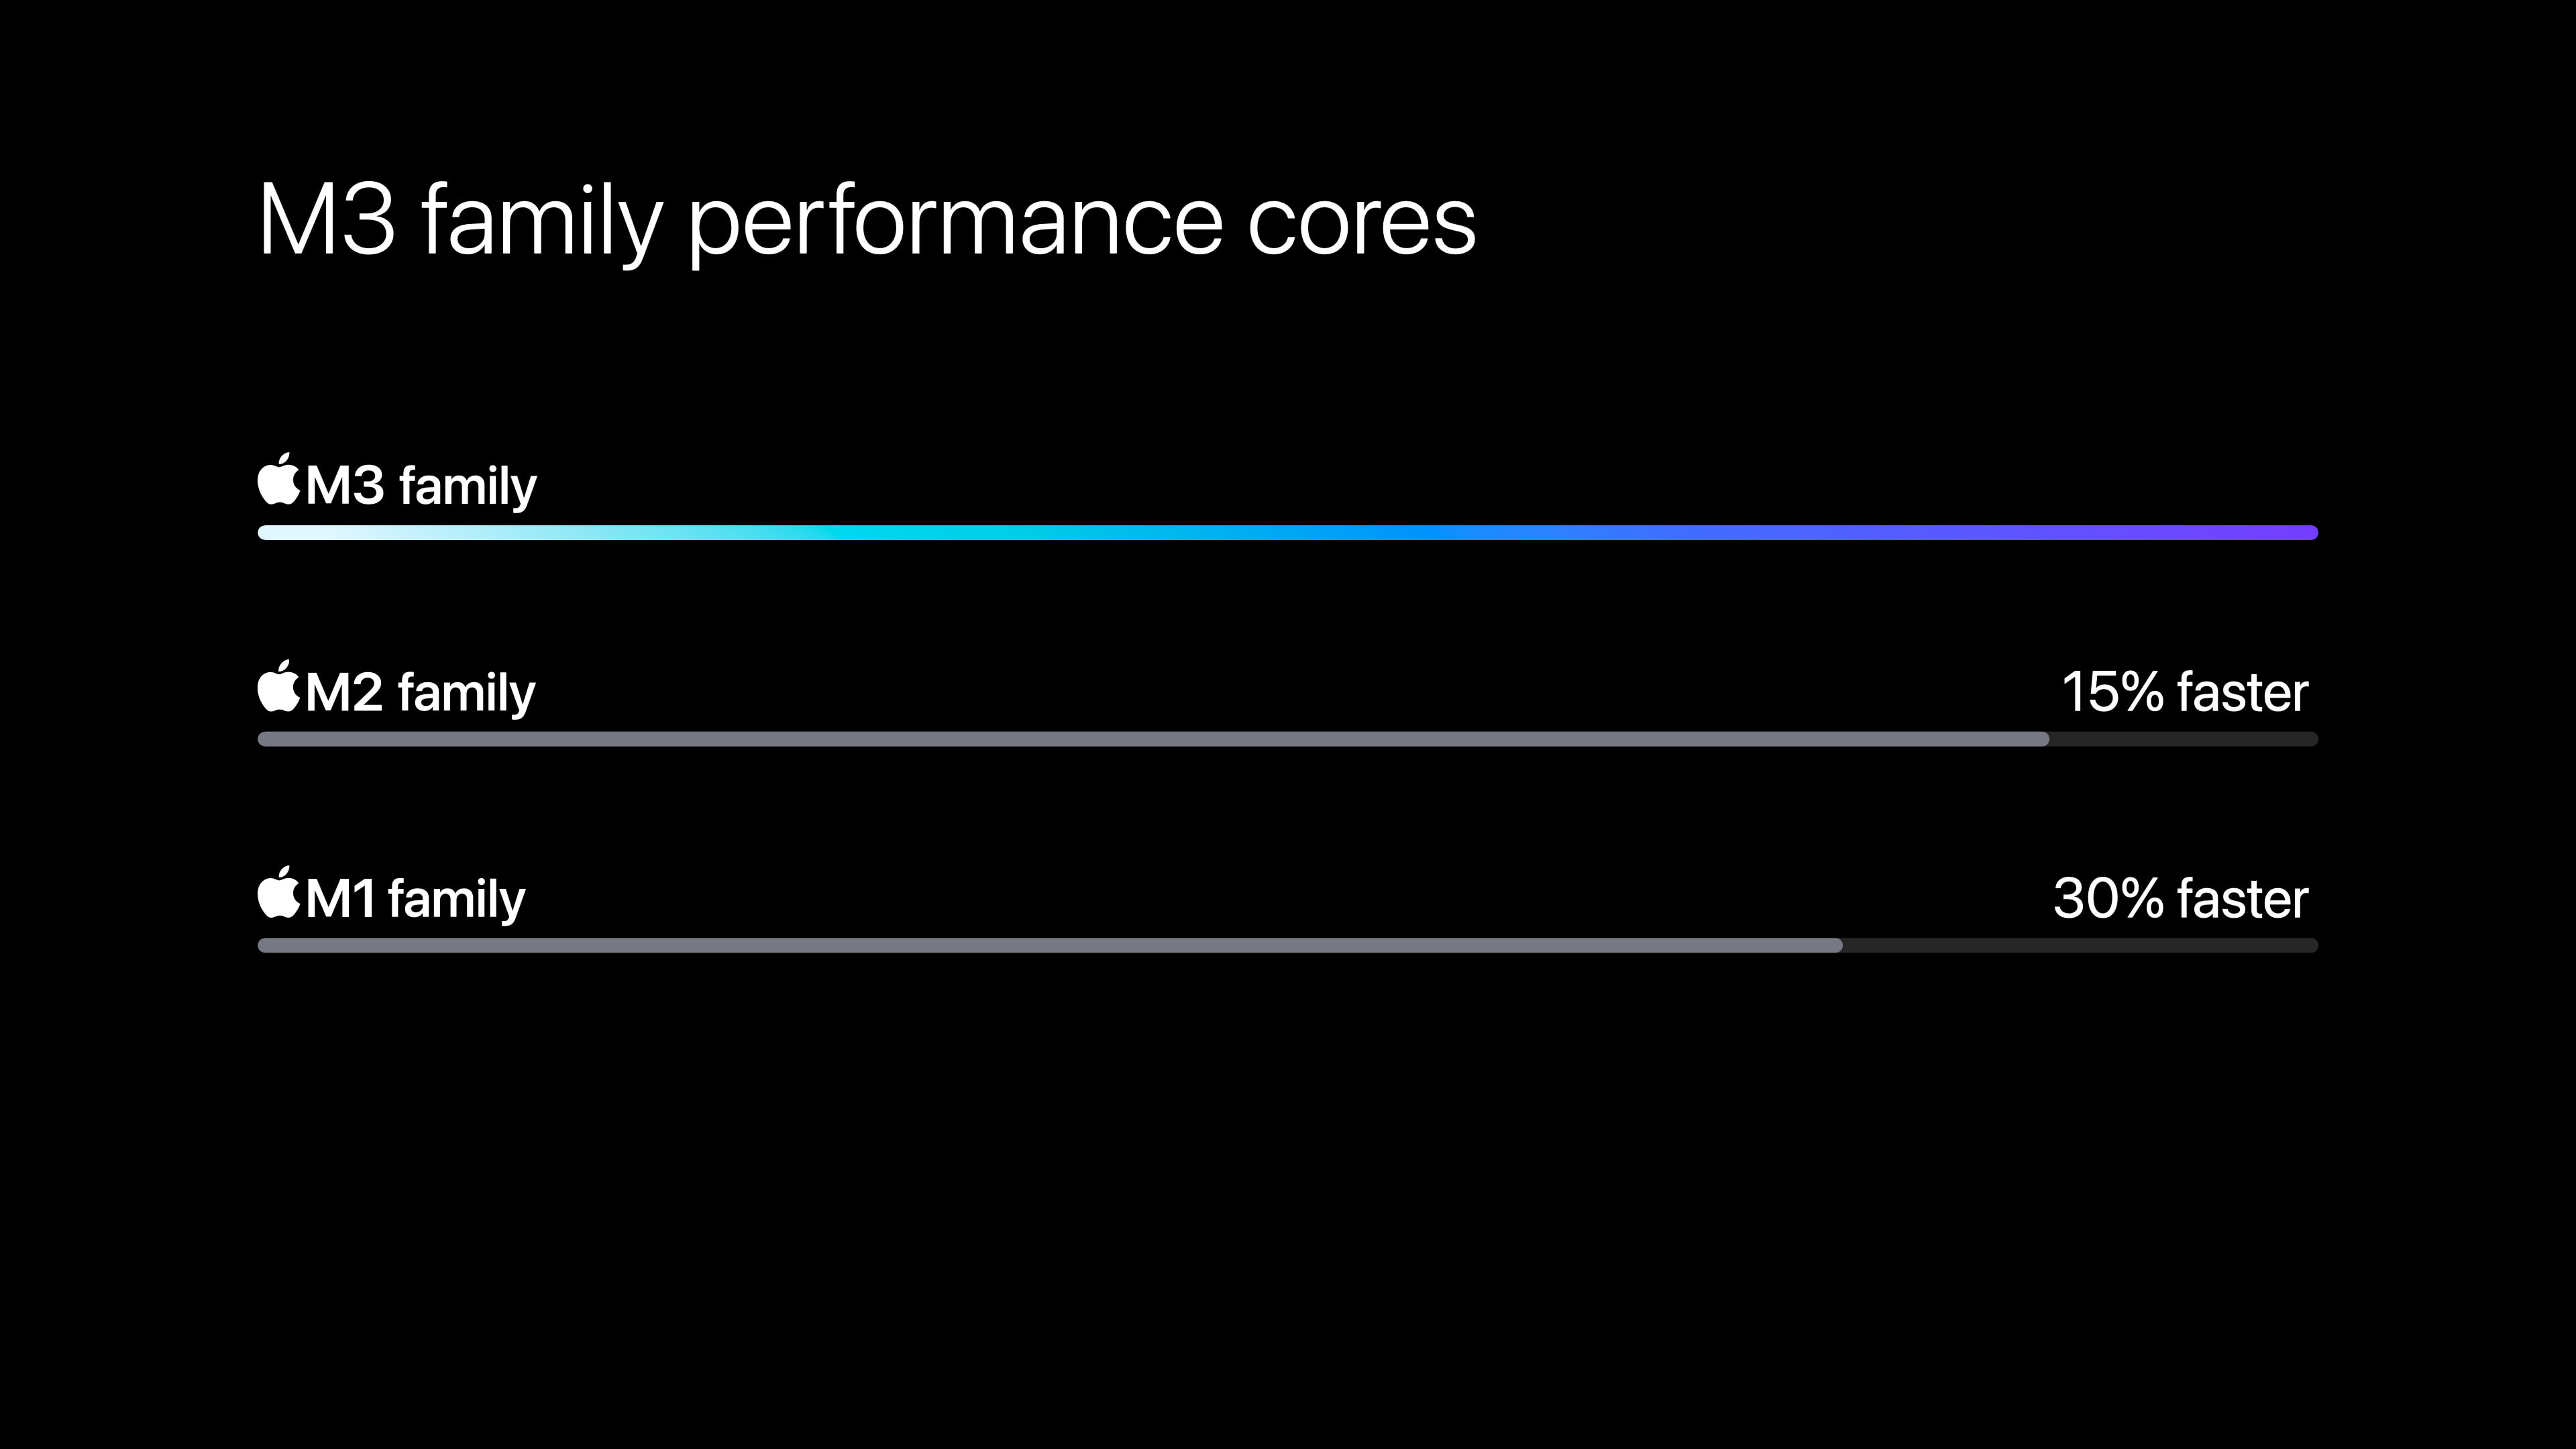 M3 family performance cores, Image: Apple